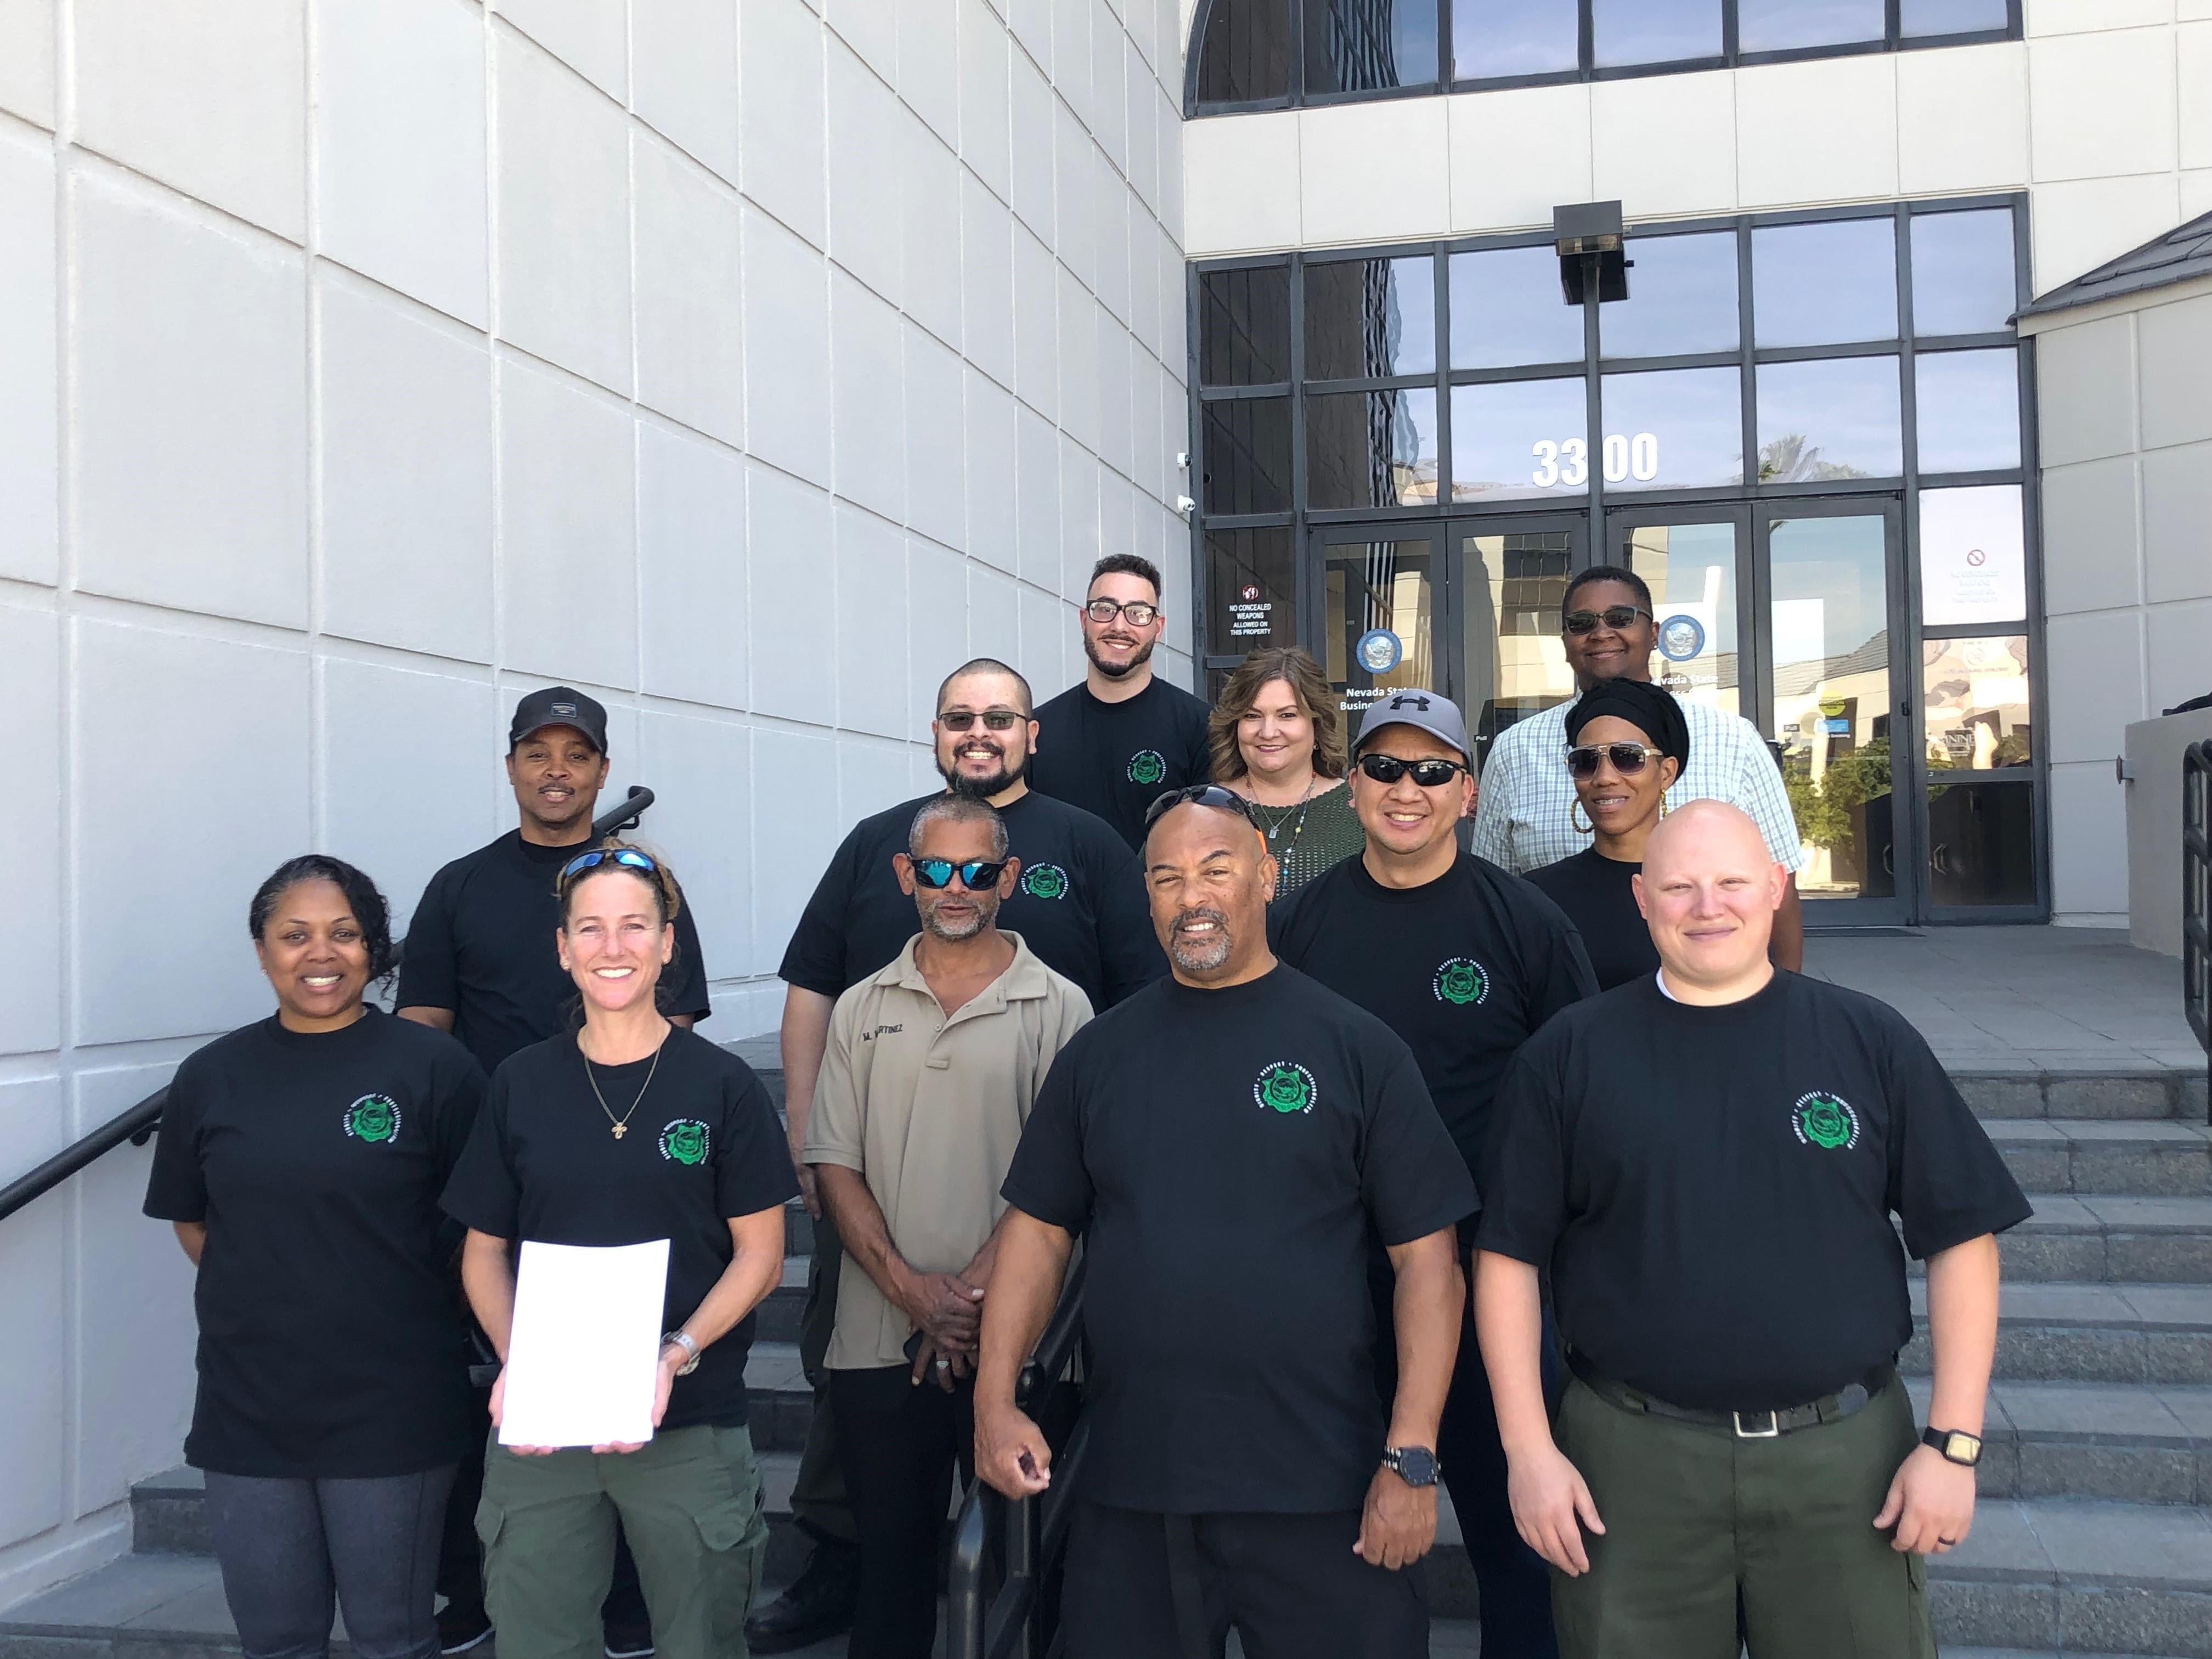 AFSCME Local 4041 Corrections members file with the state of Nevada for collective bargaining recognition